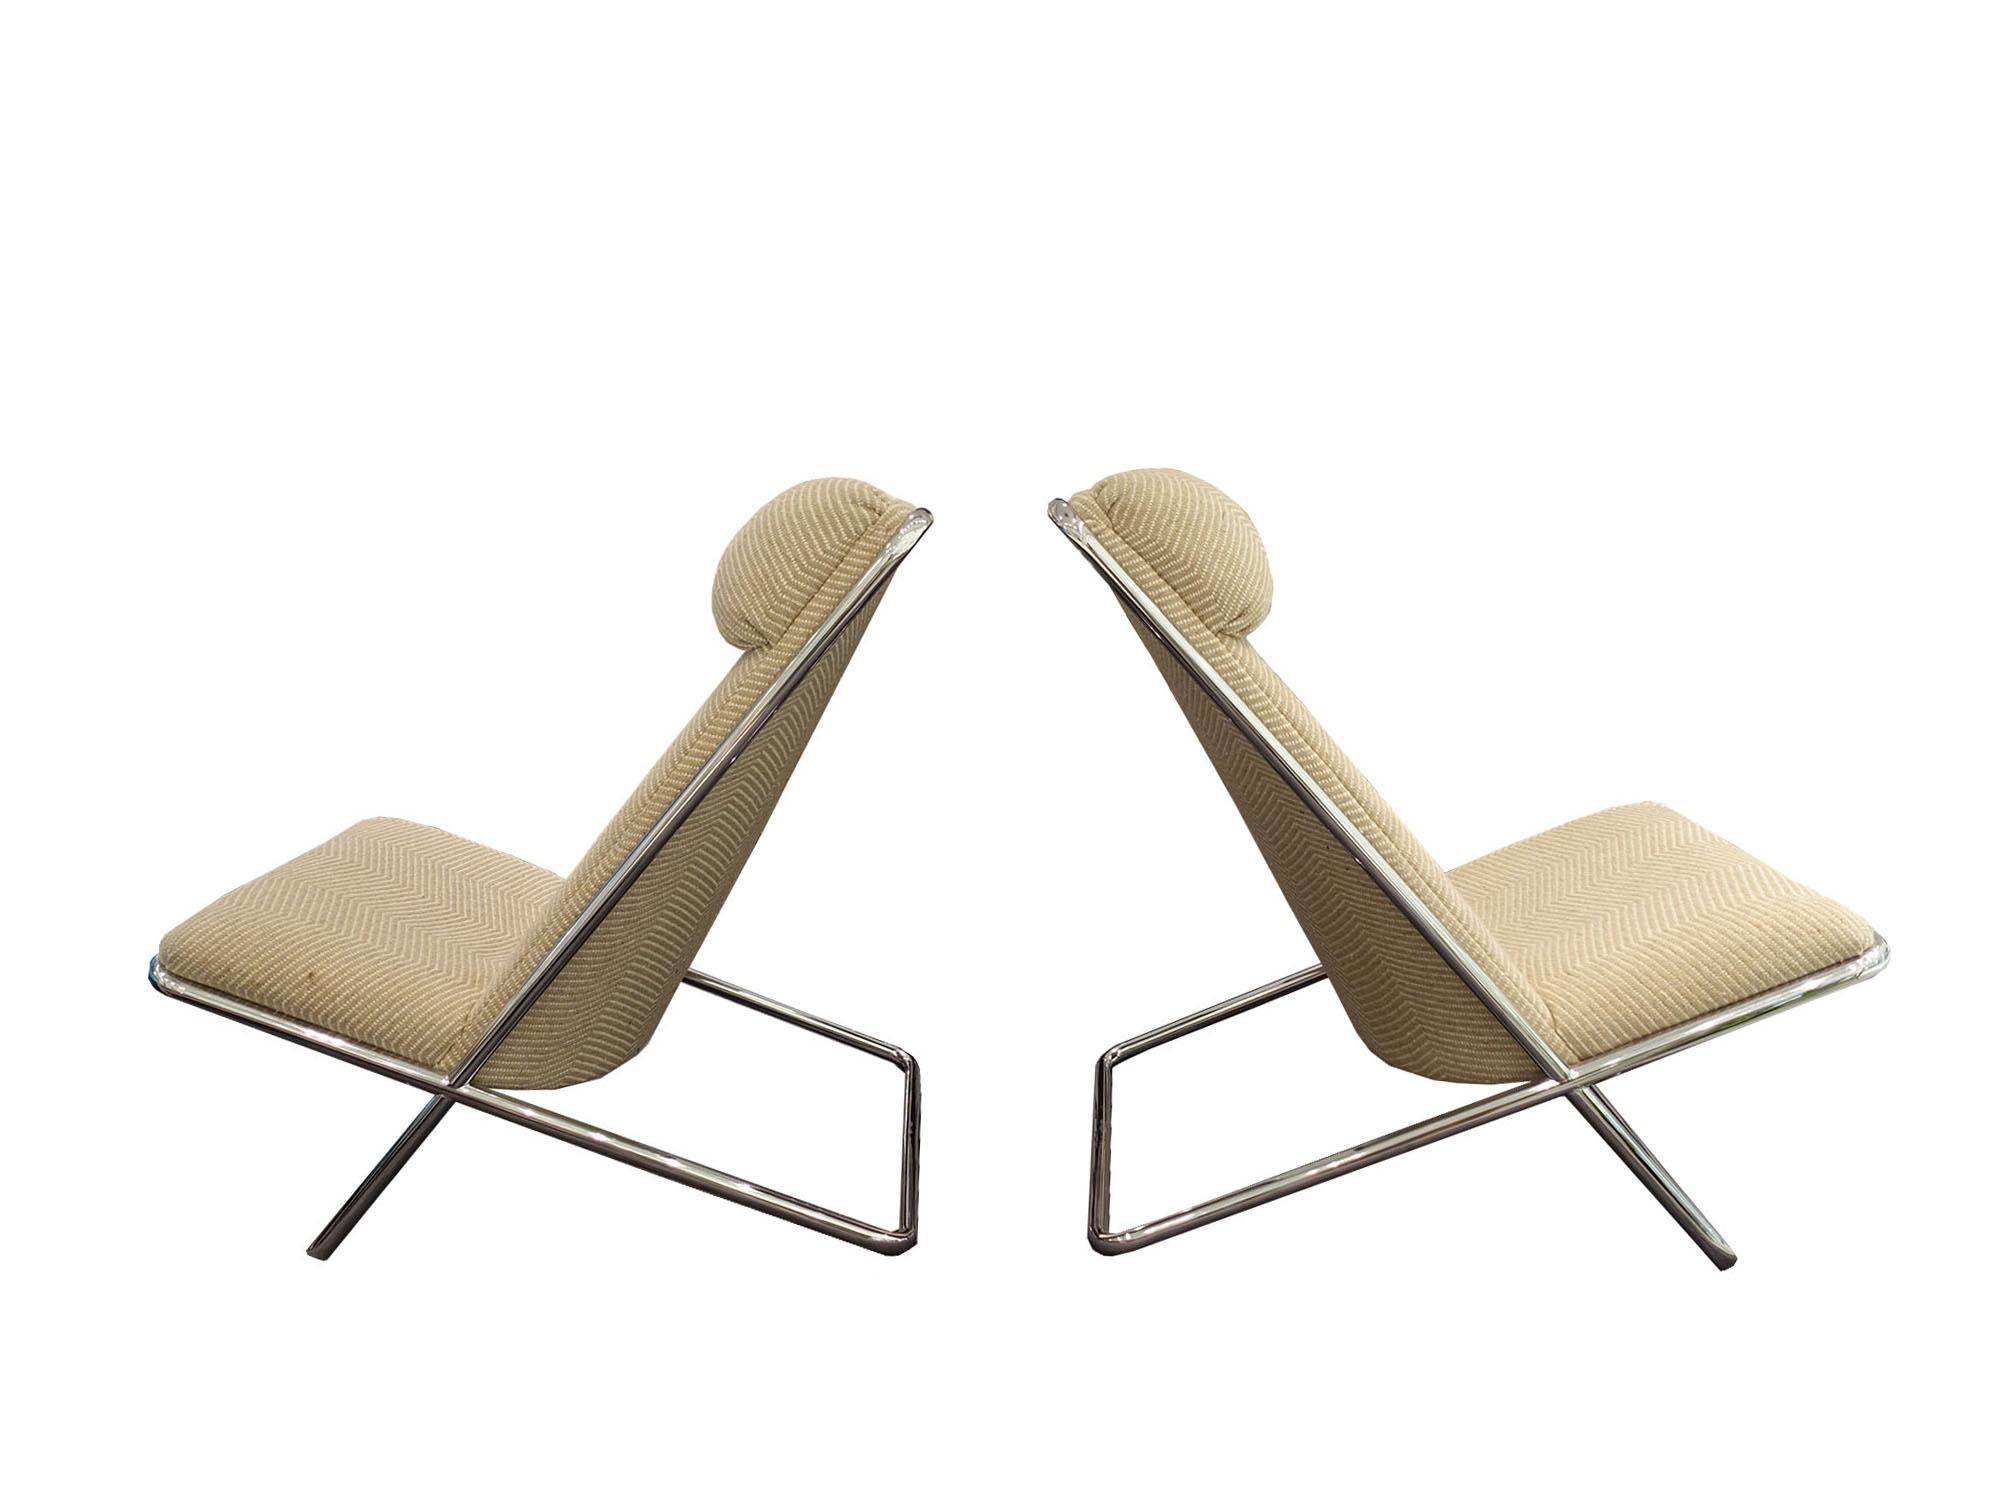 Pair of mid-century John Mascheroni scissor chairs with chevron upholstery and chrome frame, circa 1960s. Price is for the pair.